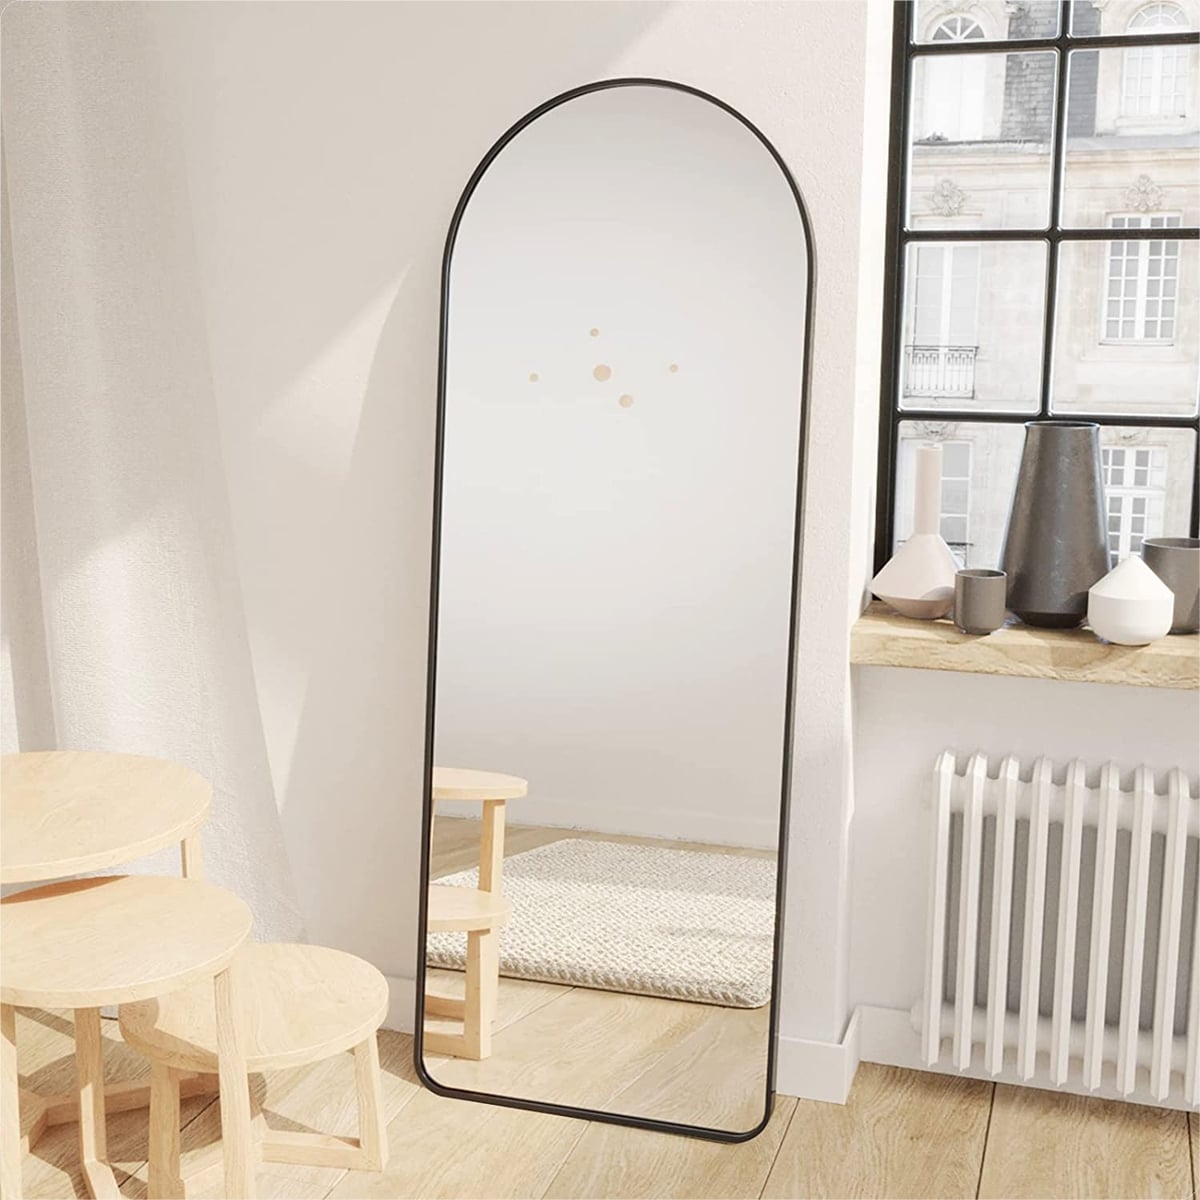 How to Make a Large Arched Mirror - Jenna Sue Design